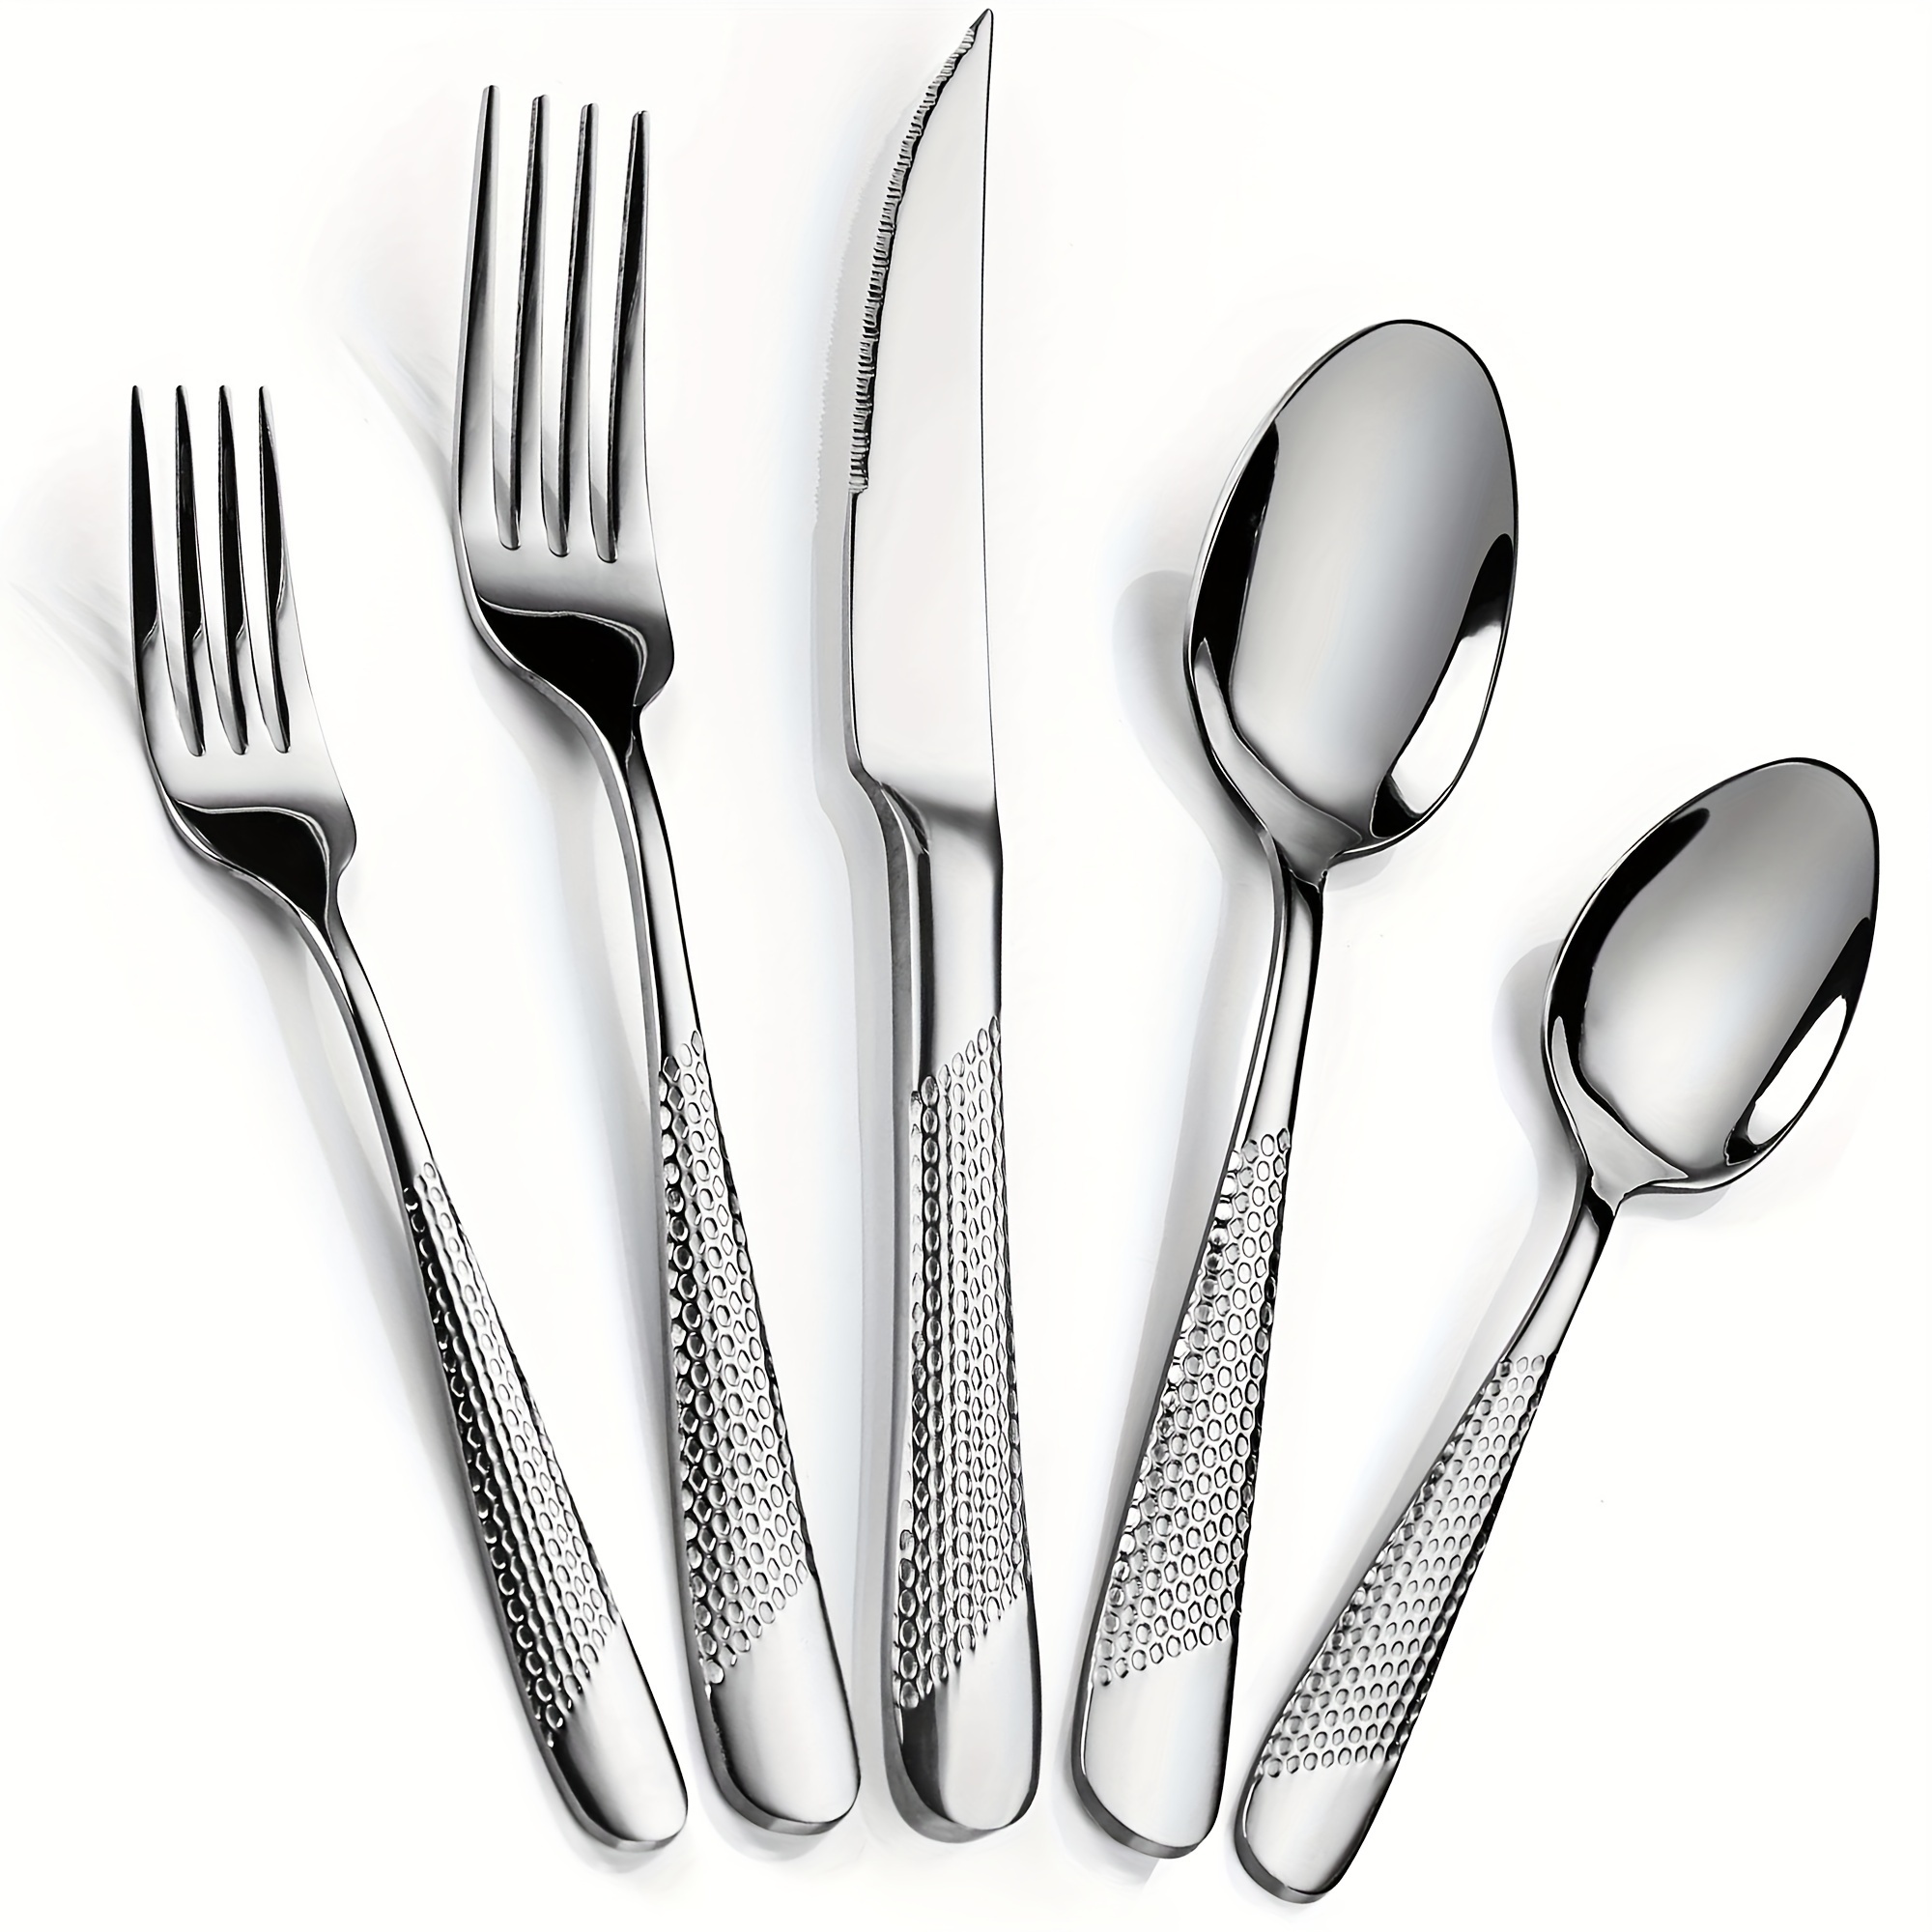 

Stainless Steel Flatware Utensil Set With Ultra Sharp 2-in-1 Serrated Knife, 40-piece Modern Hammered Silverware Set For 8, Mirror Polished, And Dishwasher Safe